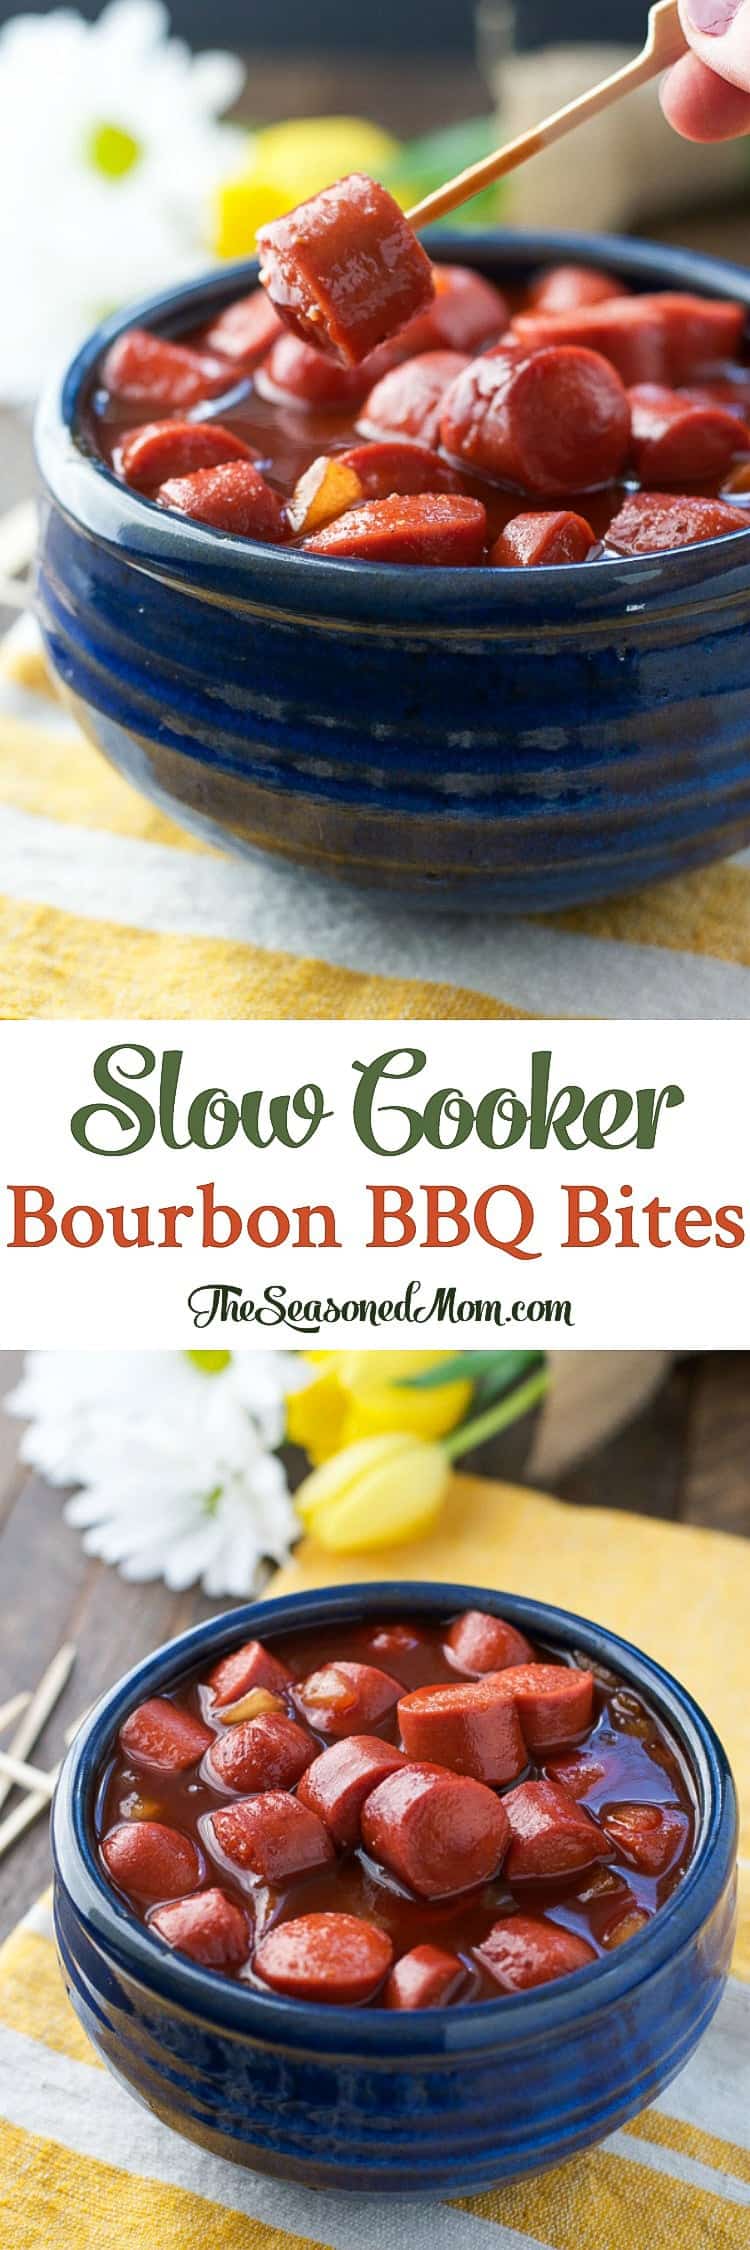 These 10-minute Slow Cooker Bourbon Barbecue Bites are crowd-pleasing easy appetizers with Southern charm! Perfect for game day or a Derby party!